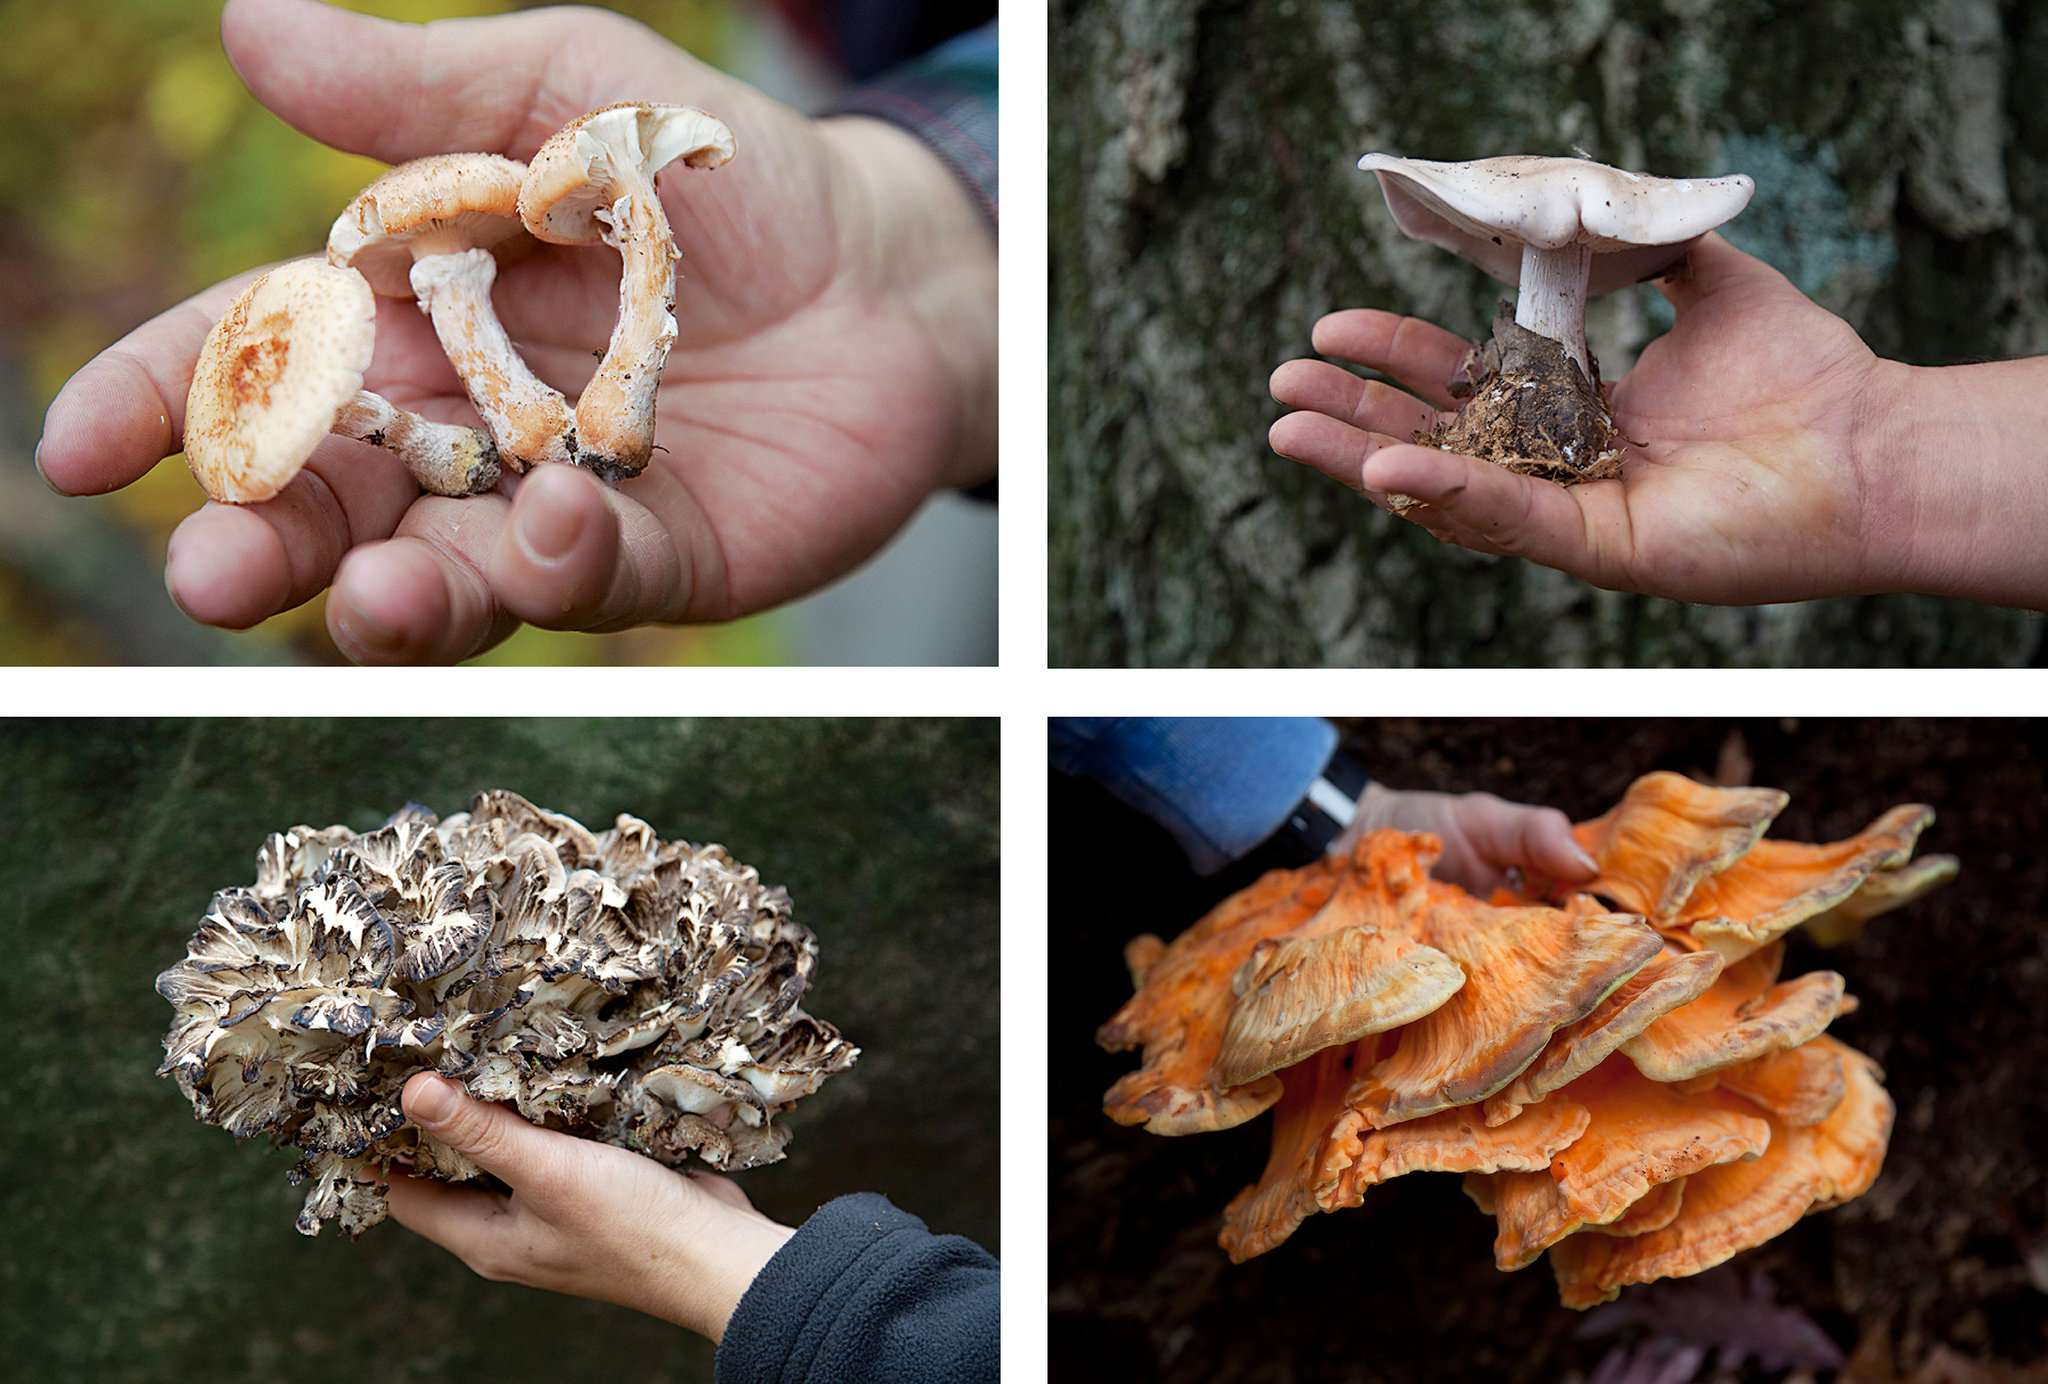 Mushrooms: The Cool and Tricky Story of a Guy